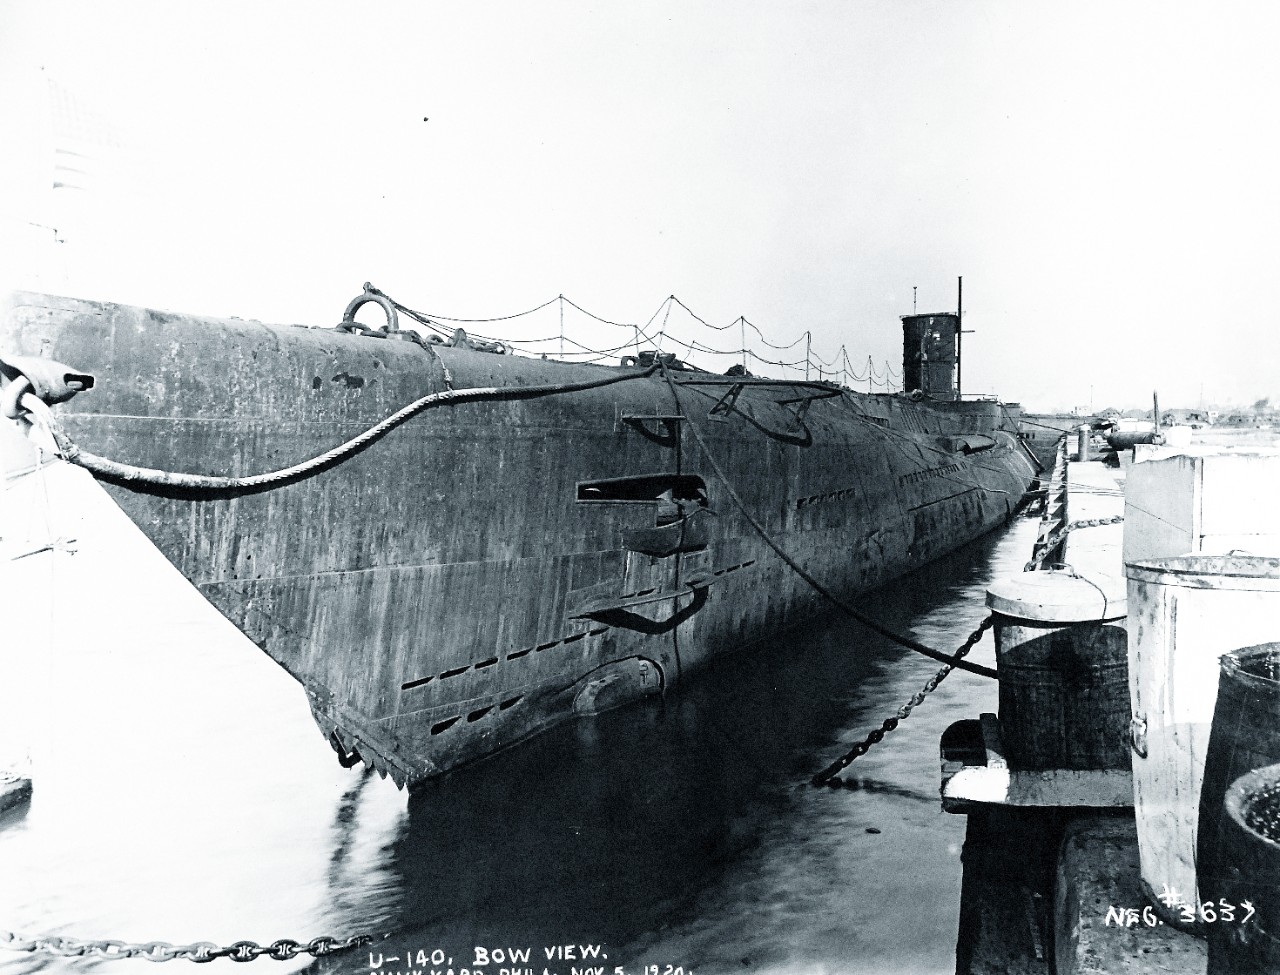 19-N-3637:   German submarine, U-140, bow view, Philadelphia Navy Yard, Philadelphia, Pennsylvania, November 5, 1920.  U-140 was sunk in the summer 1921 in aerial bombardment tests. Official Bureau of Ships Photograph, now in the collections of the National Archives.    (12/09/2014).